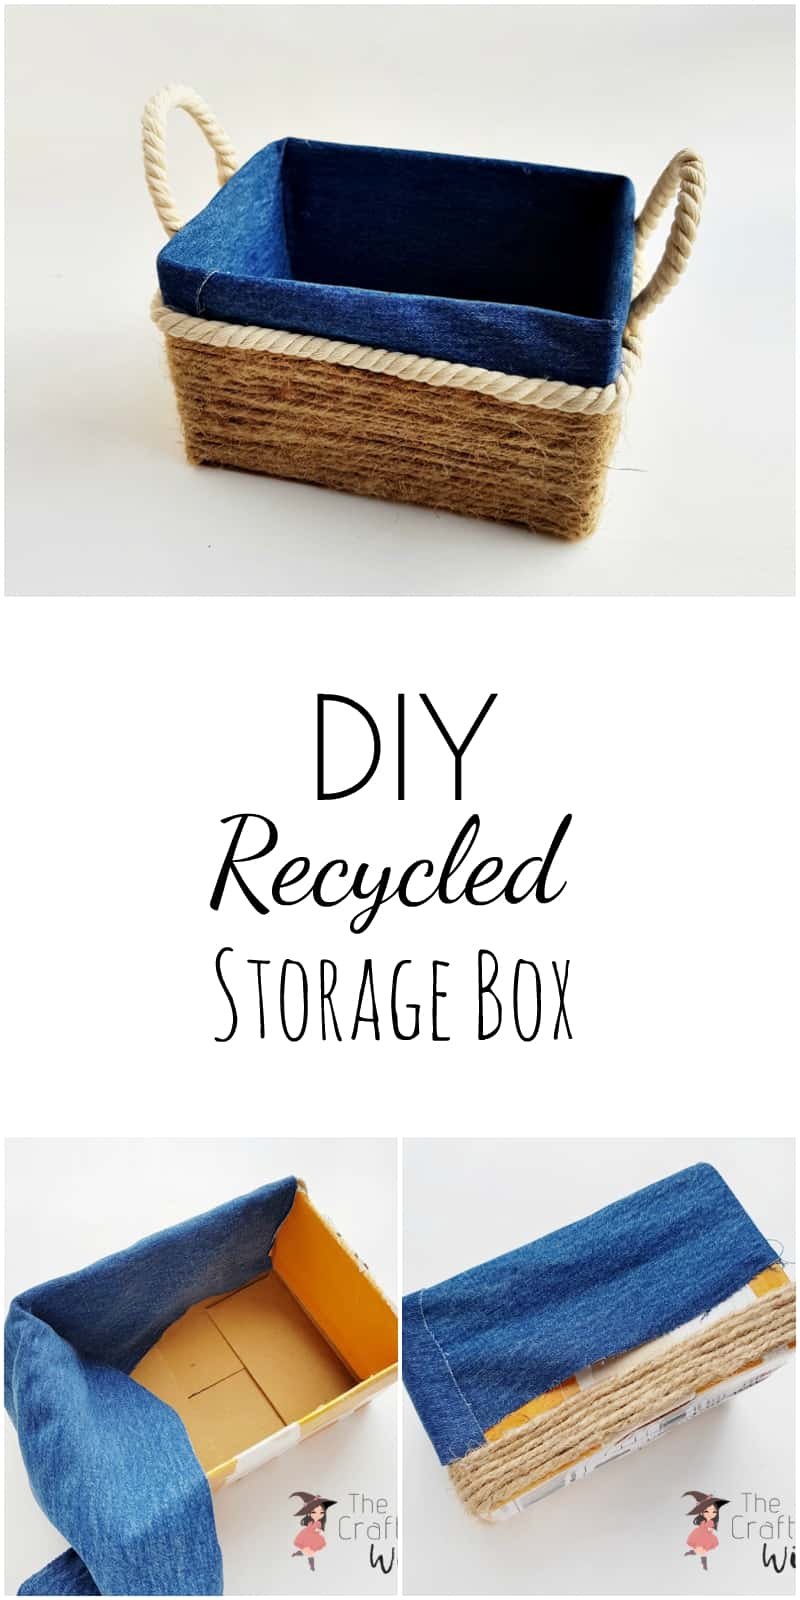 Easy & Useful DIY Storage Box from Cardboard Boxes (+ Video)